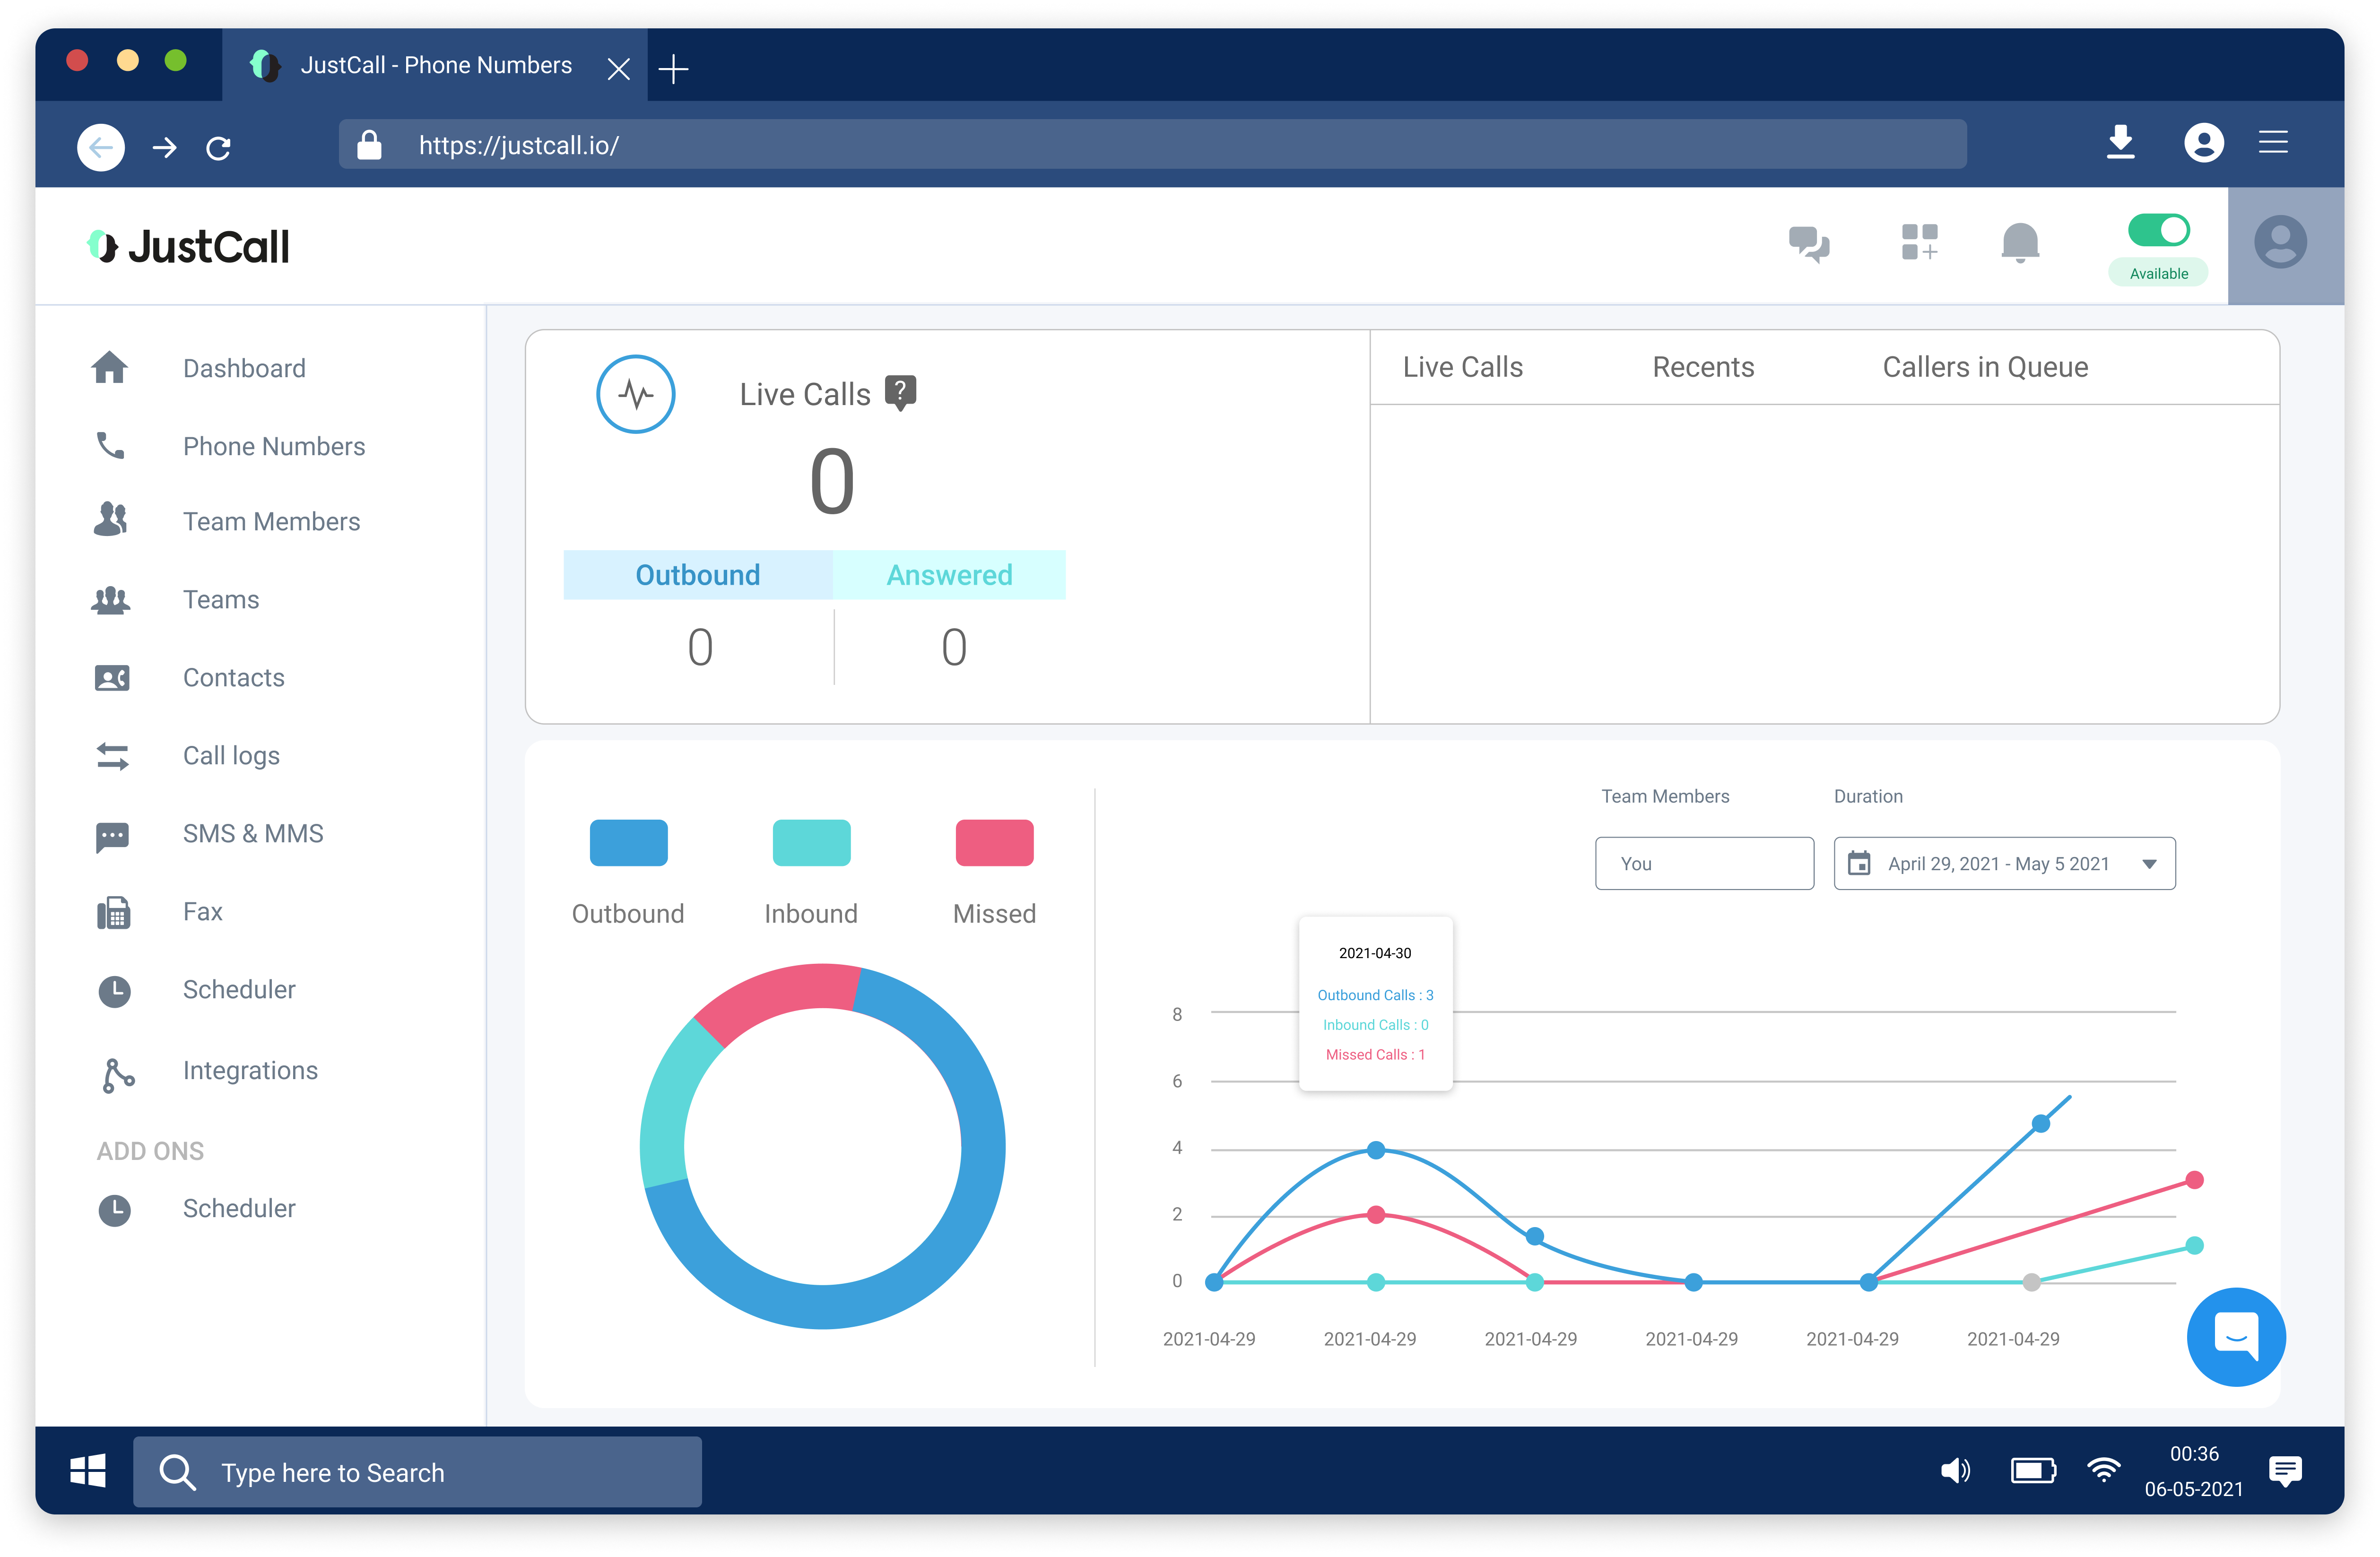 JustCall Software - Analytical dashboard